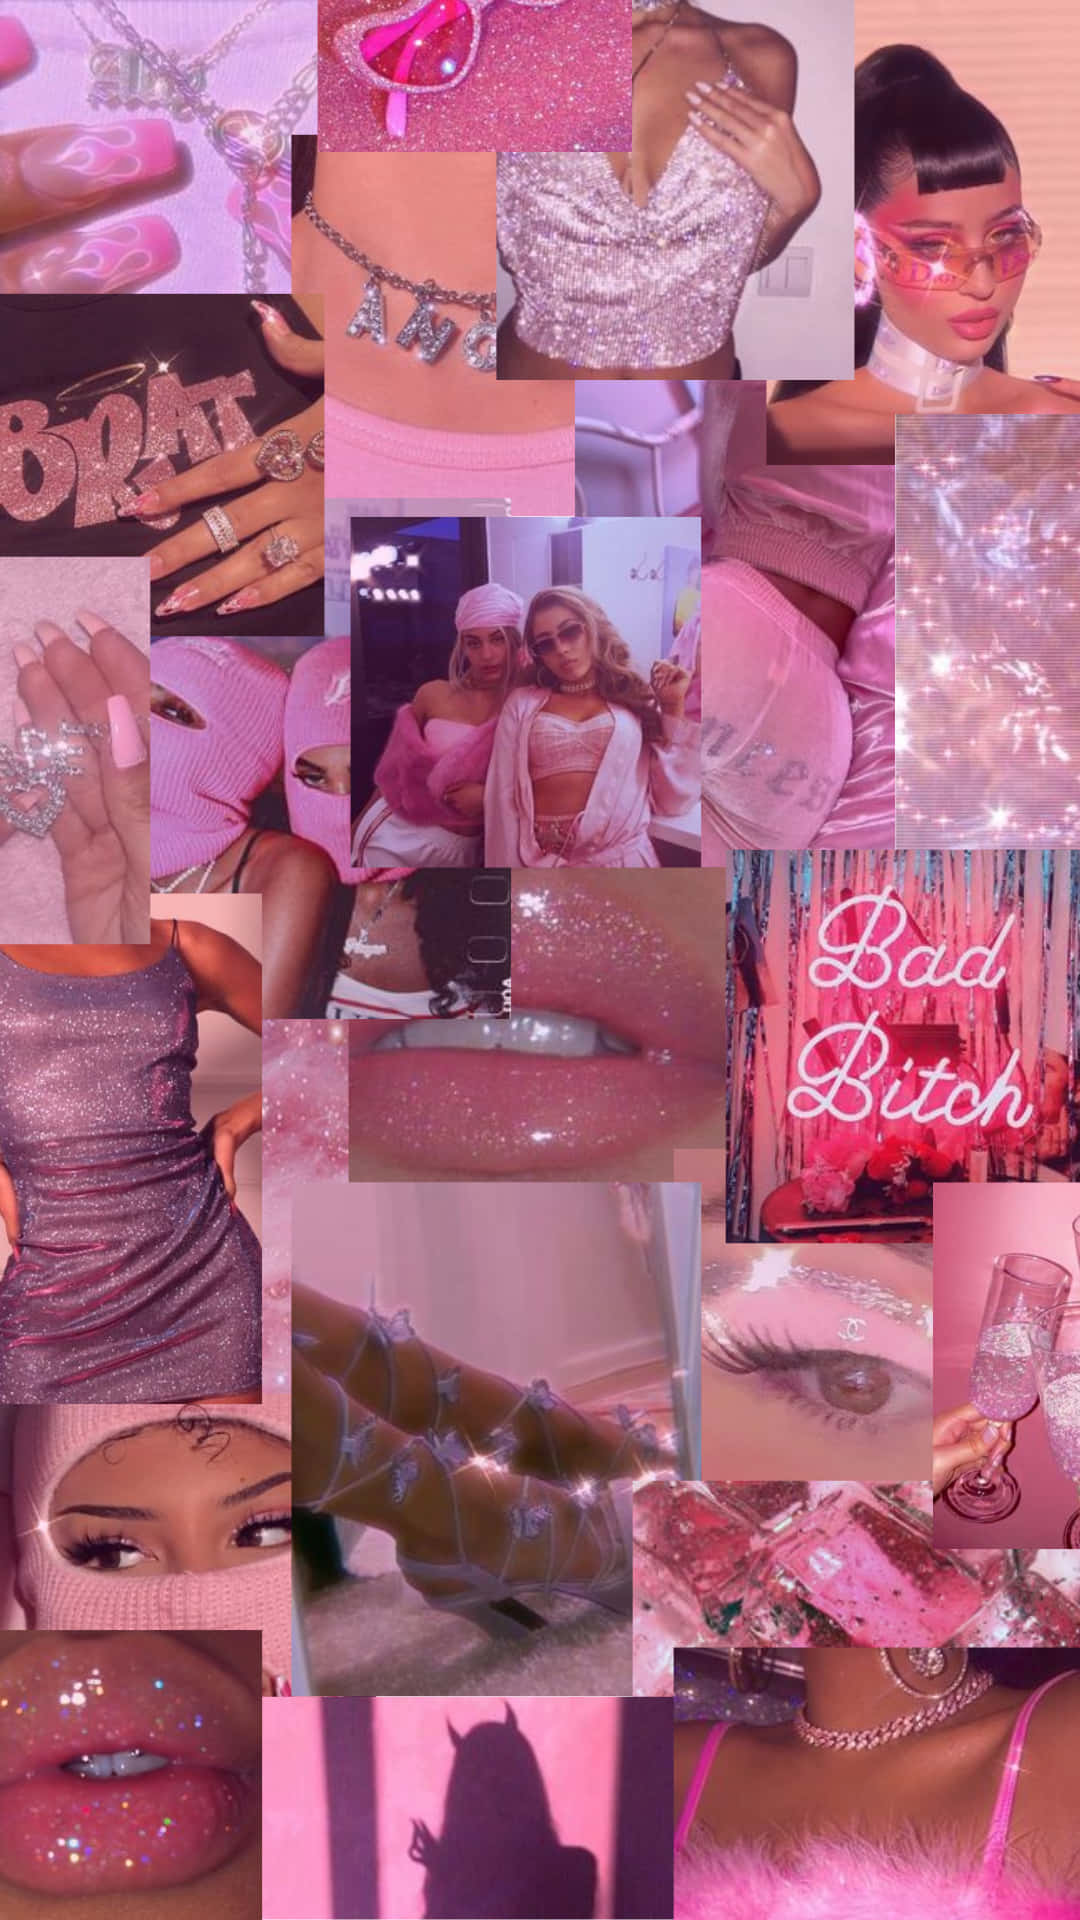 A Collage Of Pink Pictures With Various Items Wallpaper